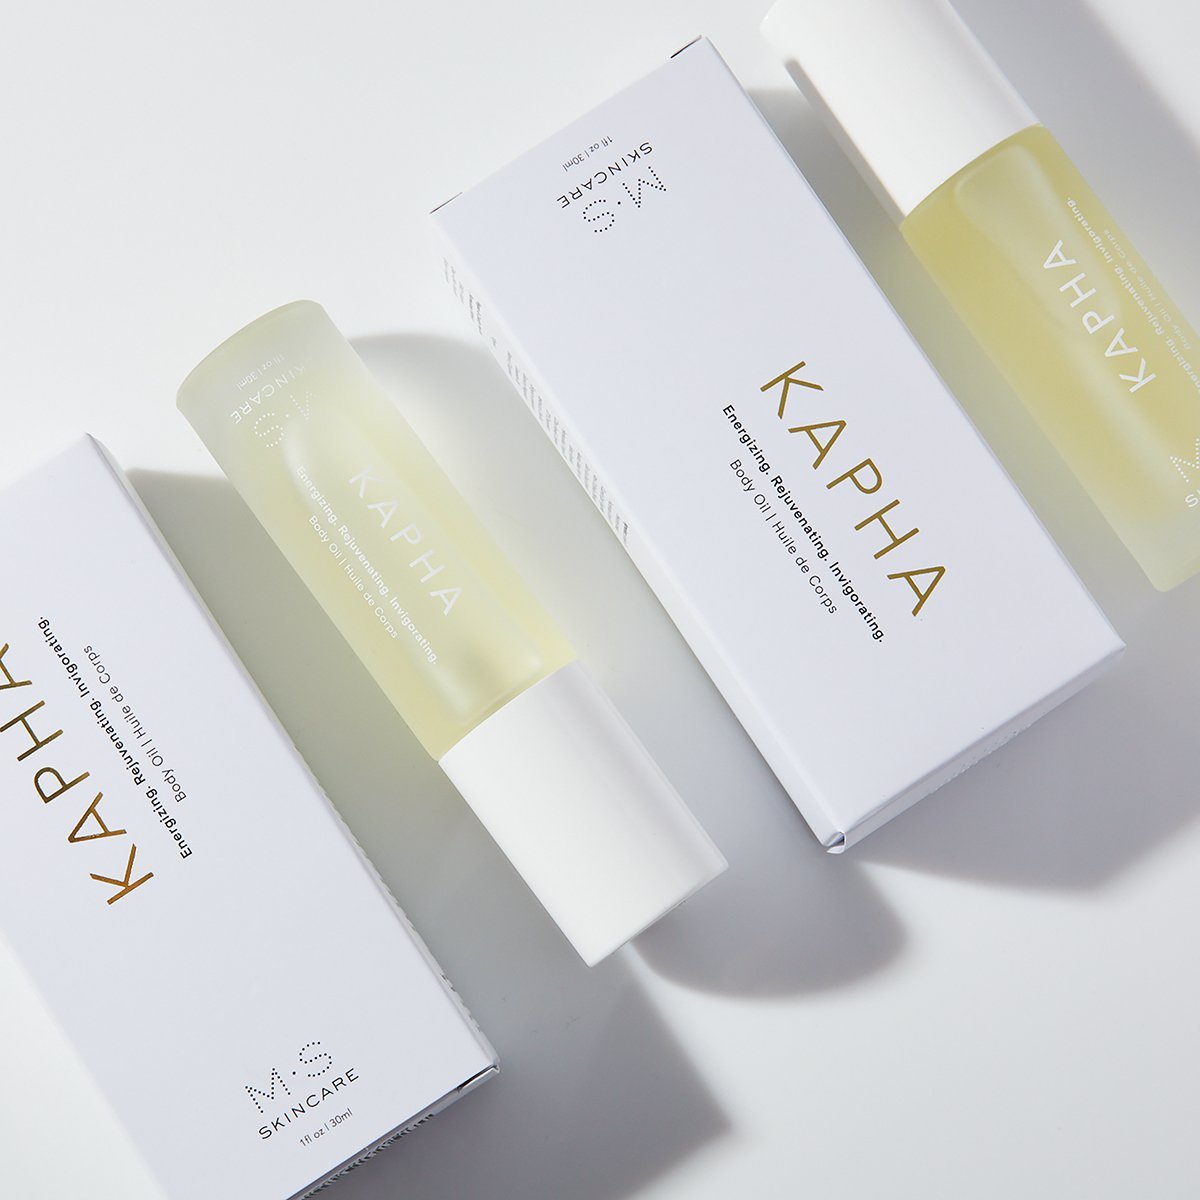  KAPHA | Energizing Body Oil Travel Mullein and Sparrow Perfumarie